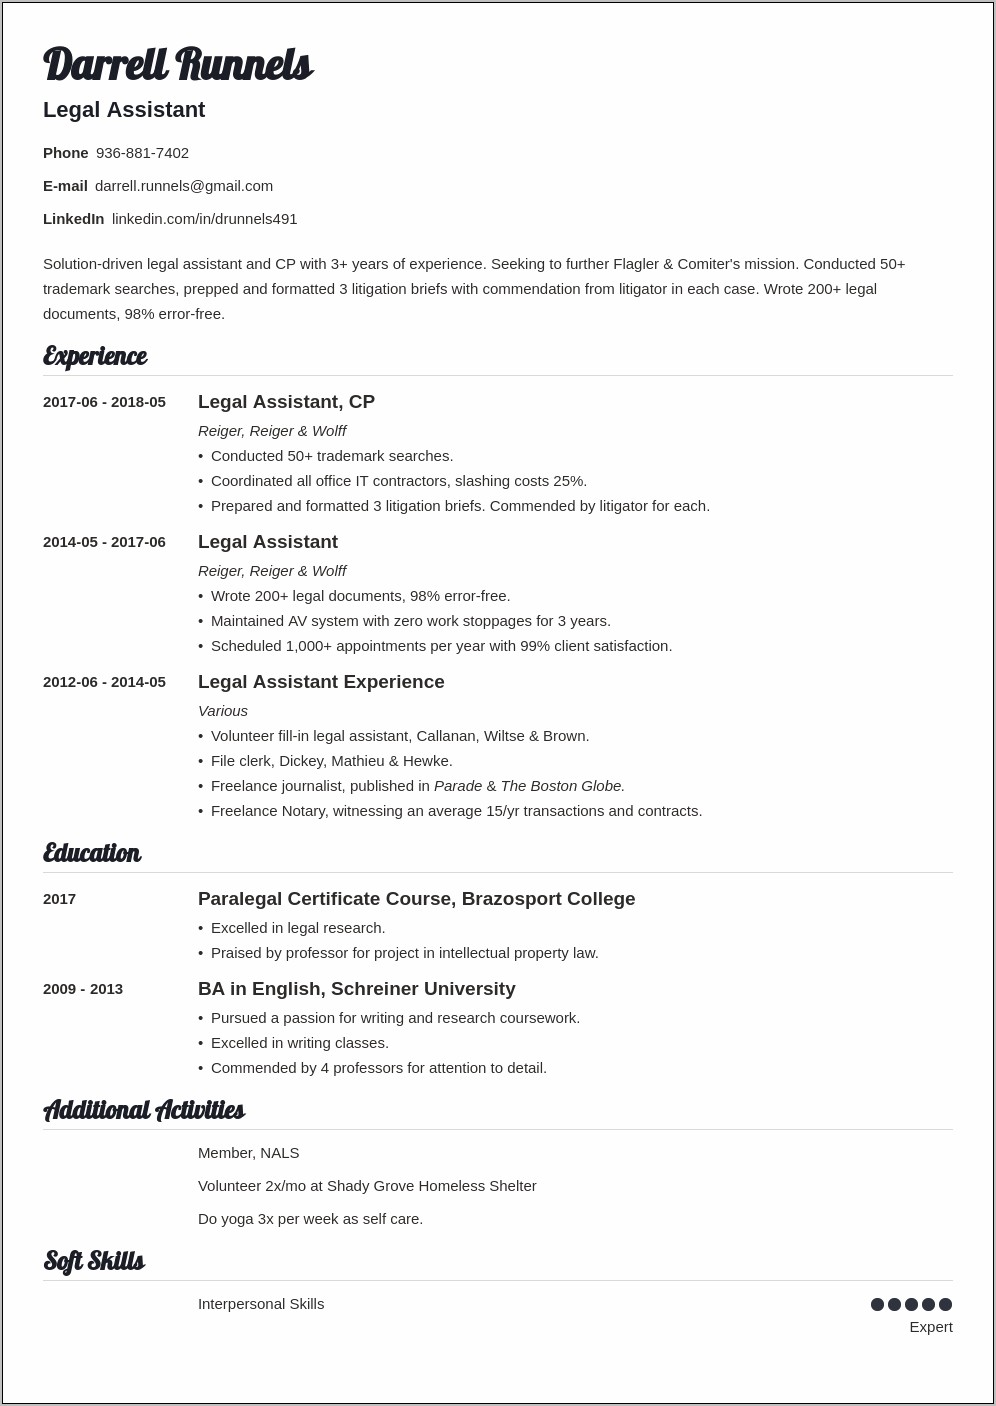 Skills To List On Resume For Legal Assistant